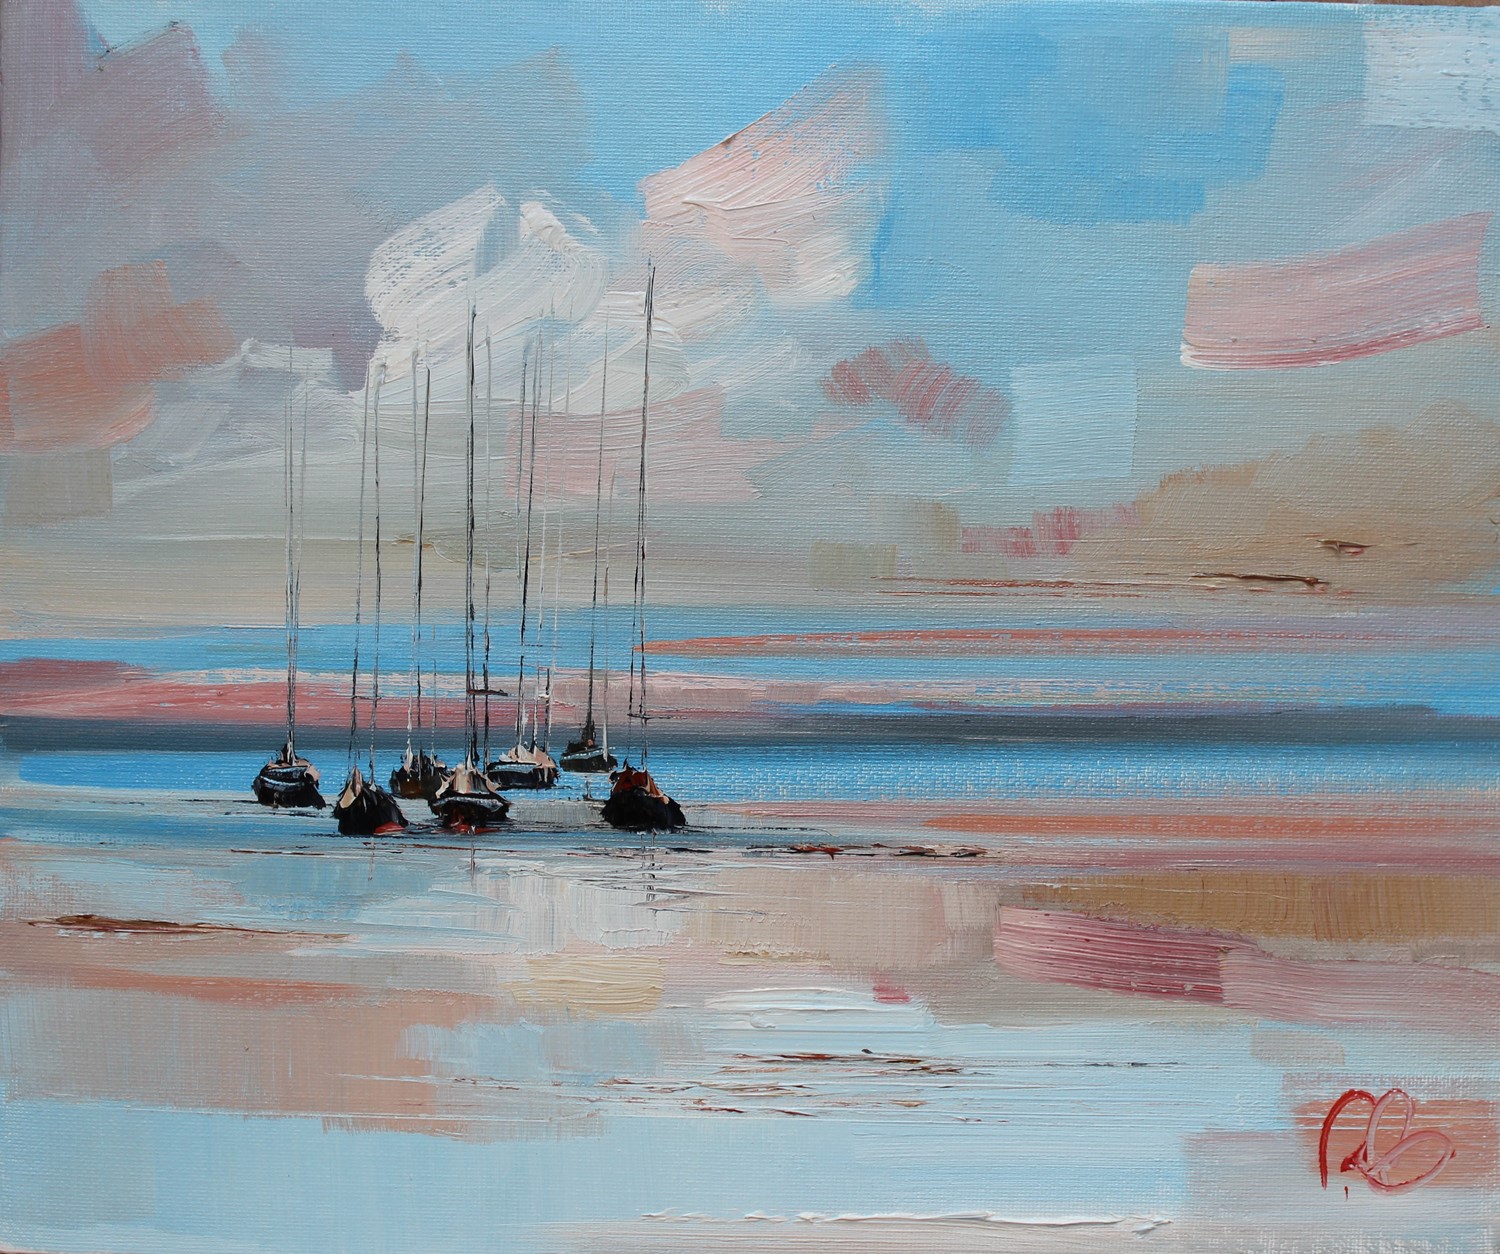 'Yachts after a long Sunset' by artist Rosanne Barr